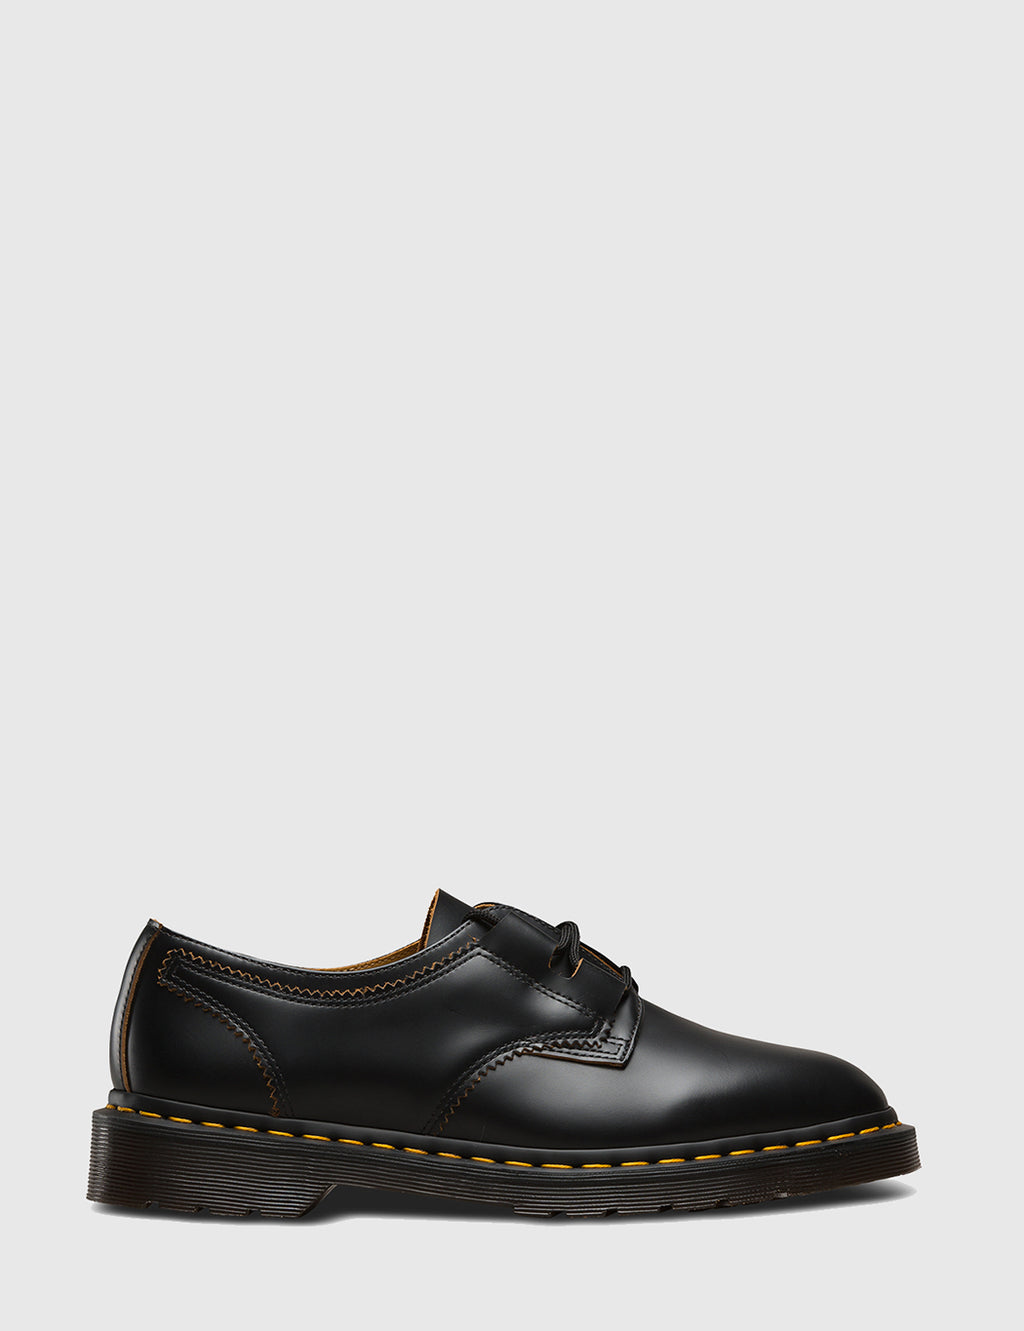 Dr Martens 1461 Ghillie Shoes - Black Smooth | URBAN EXCESS.